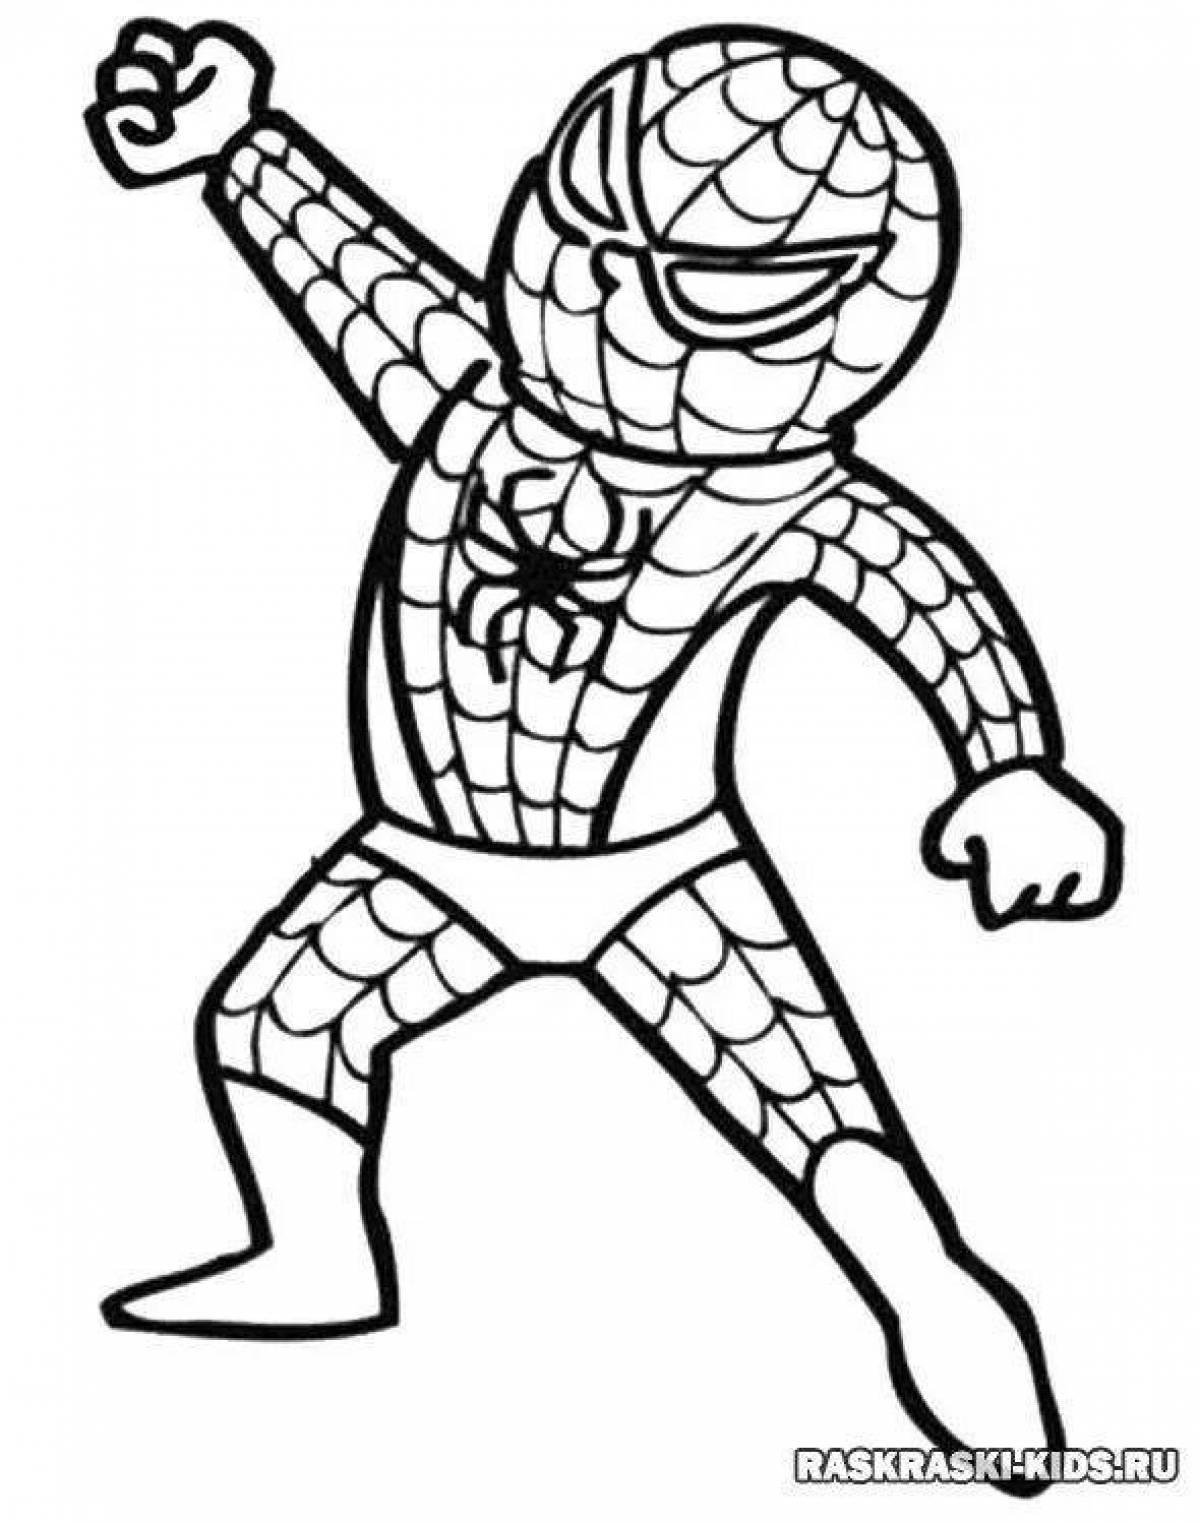 Spider-man fun coloring for kids